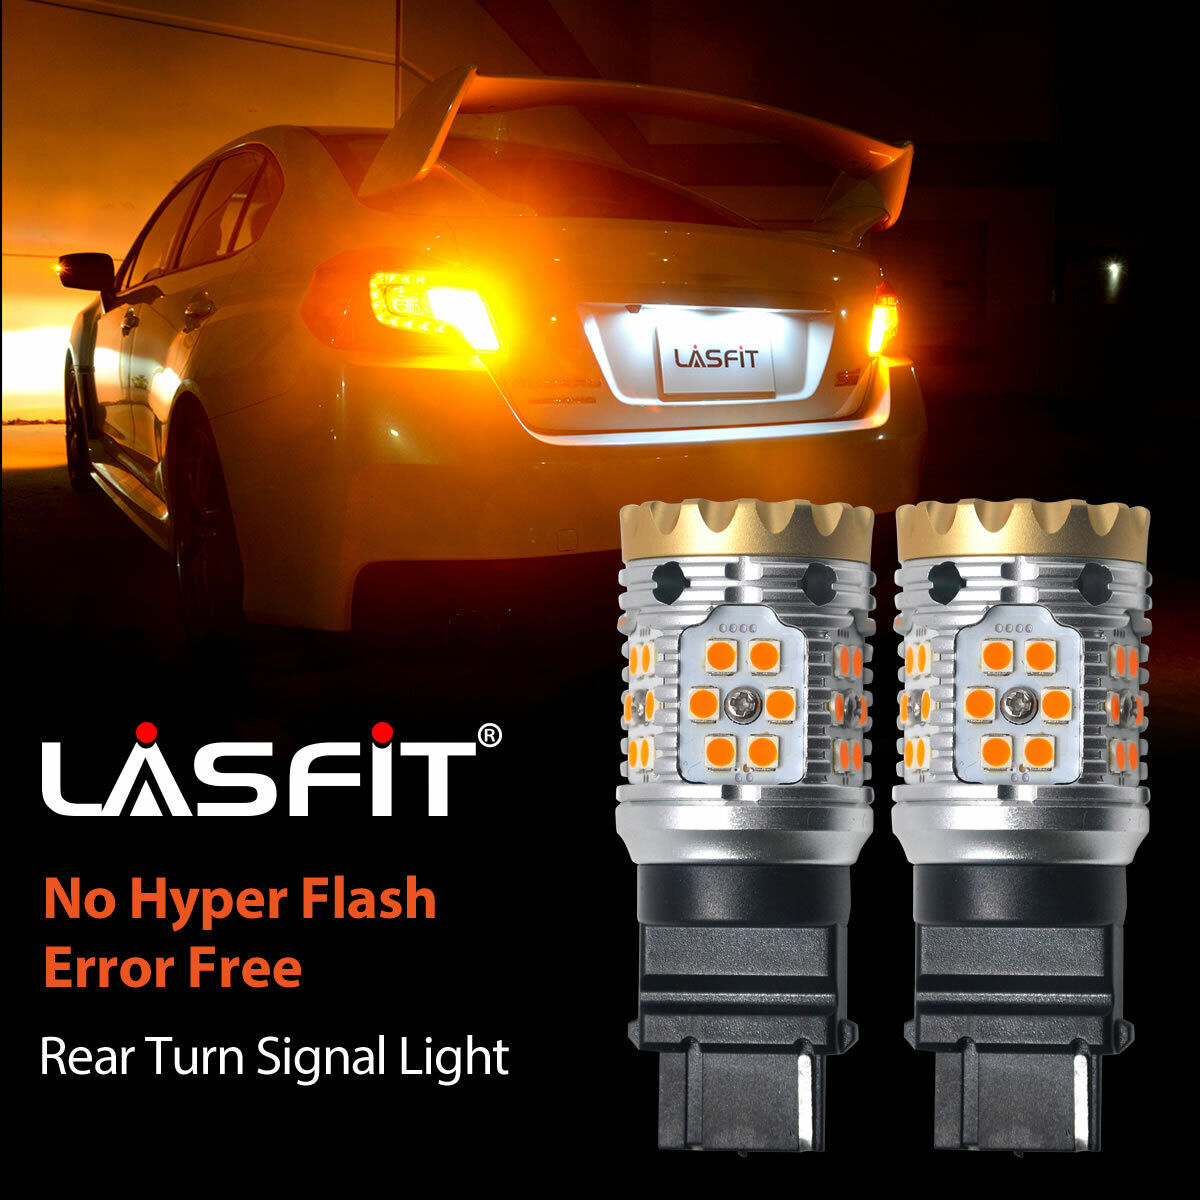 Lasfit 3156 LED Rear Turn Signal Light Bulbs Canbus for Nissan Altima 1998-2015